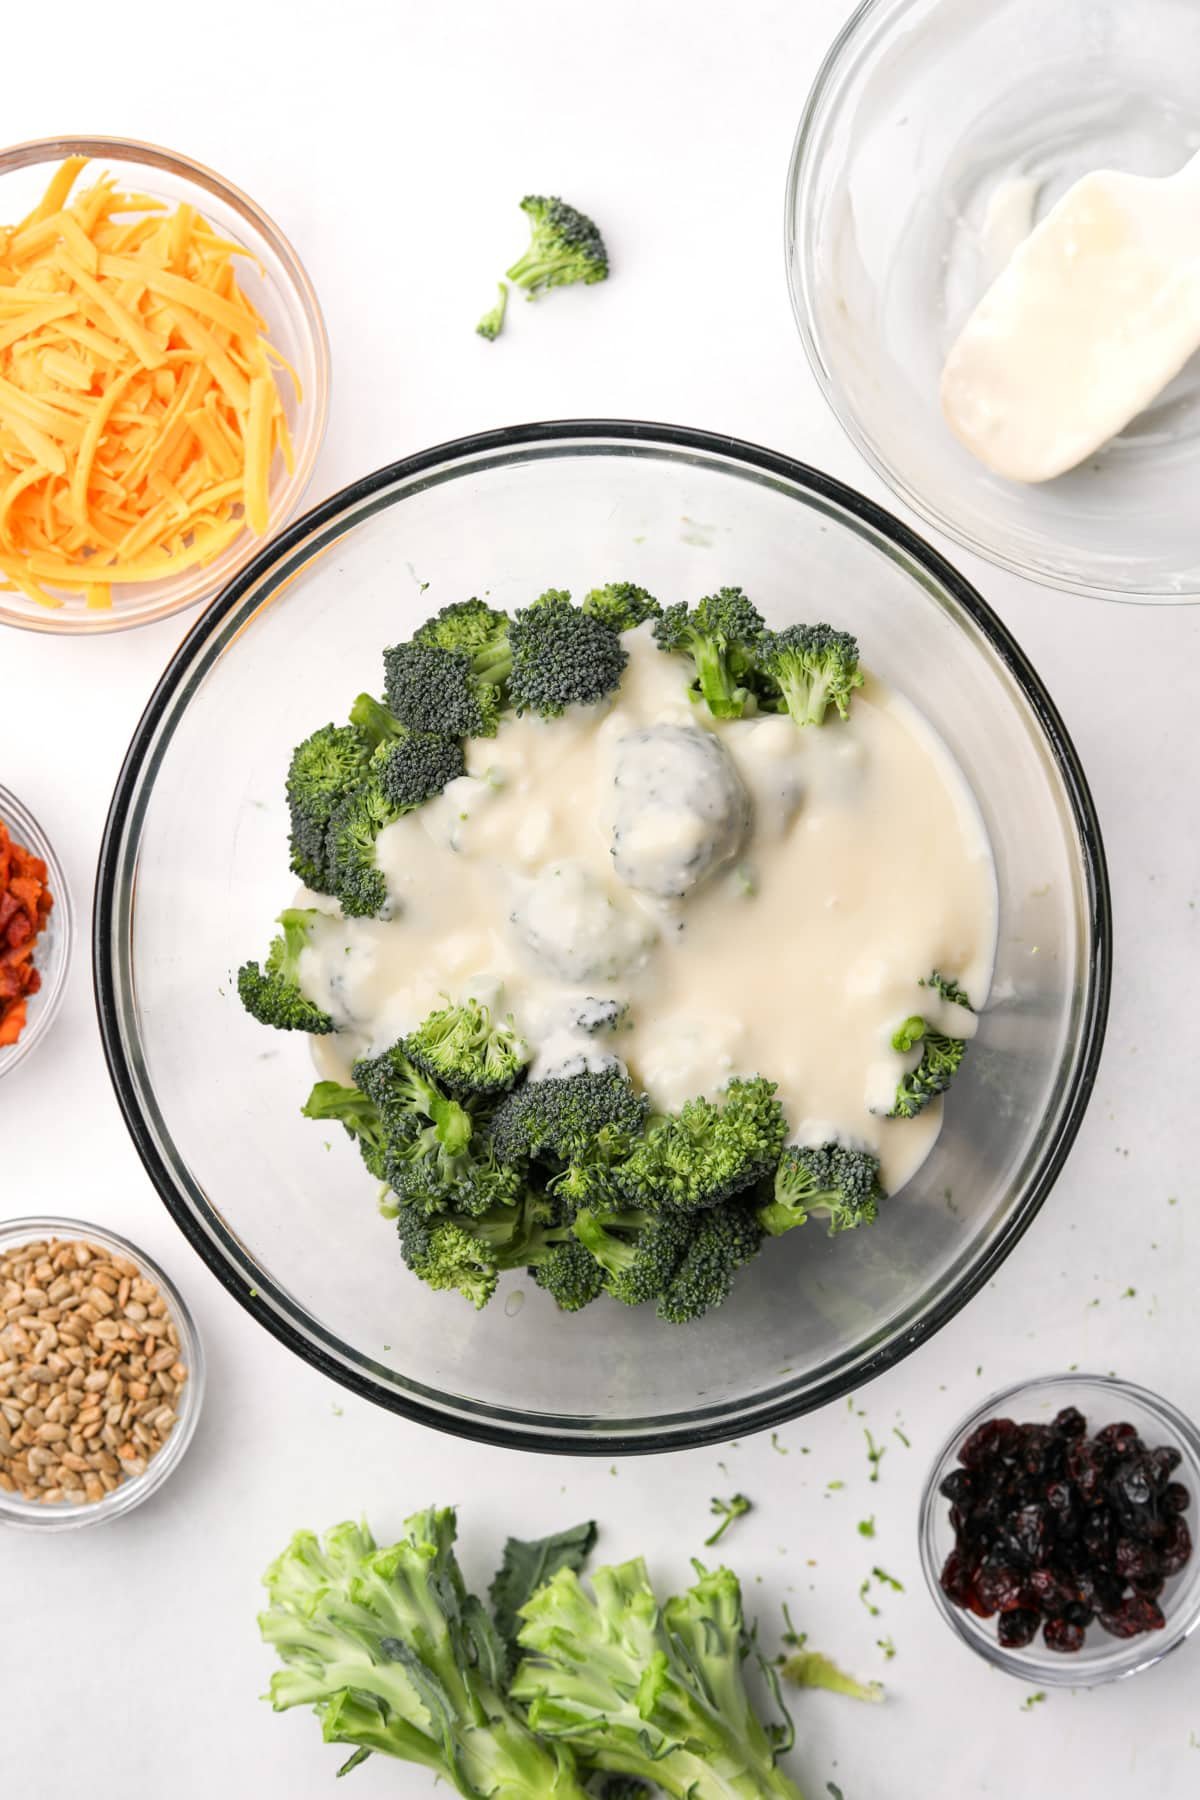 A bowl of broccoli with a creamy dressing poured on top.